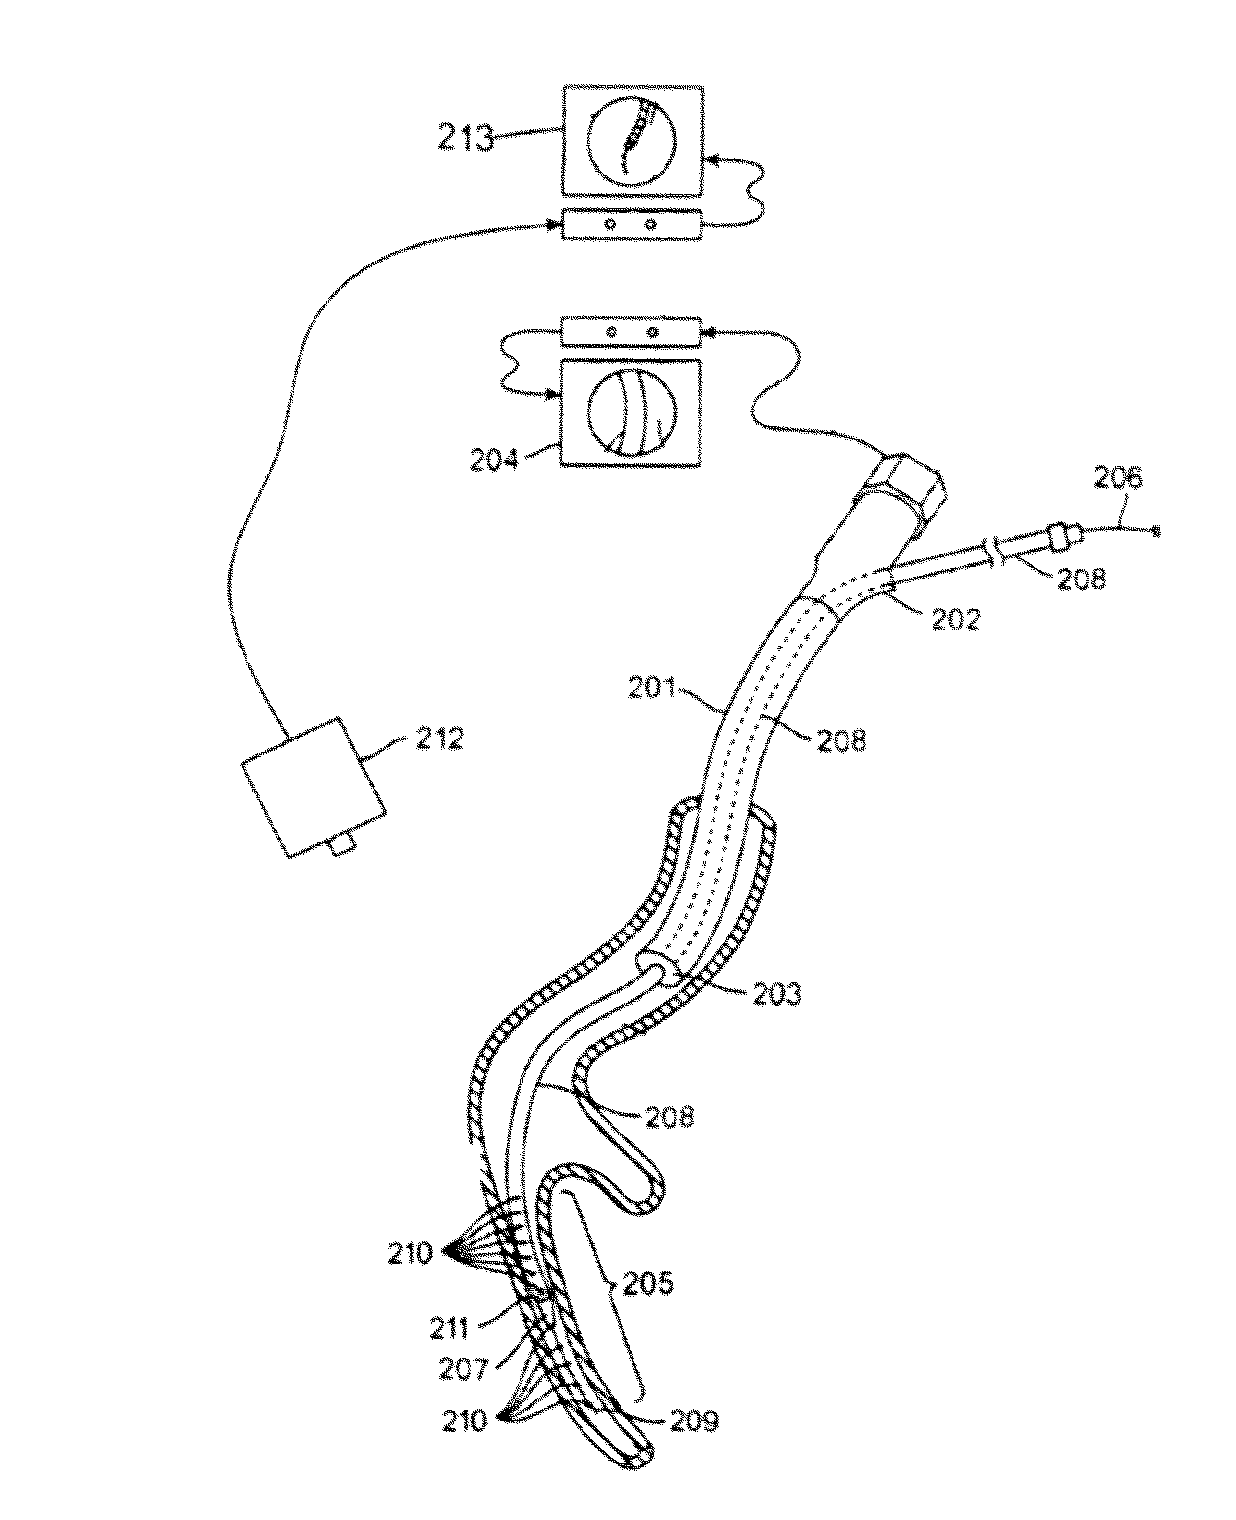 Lung volume-reducing elastic implant and instrument